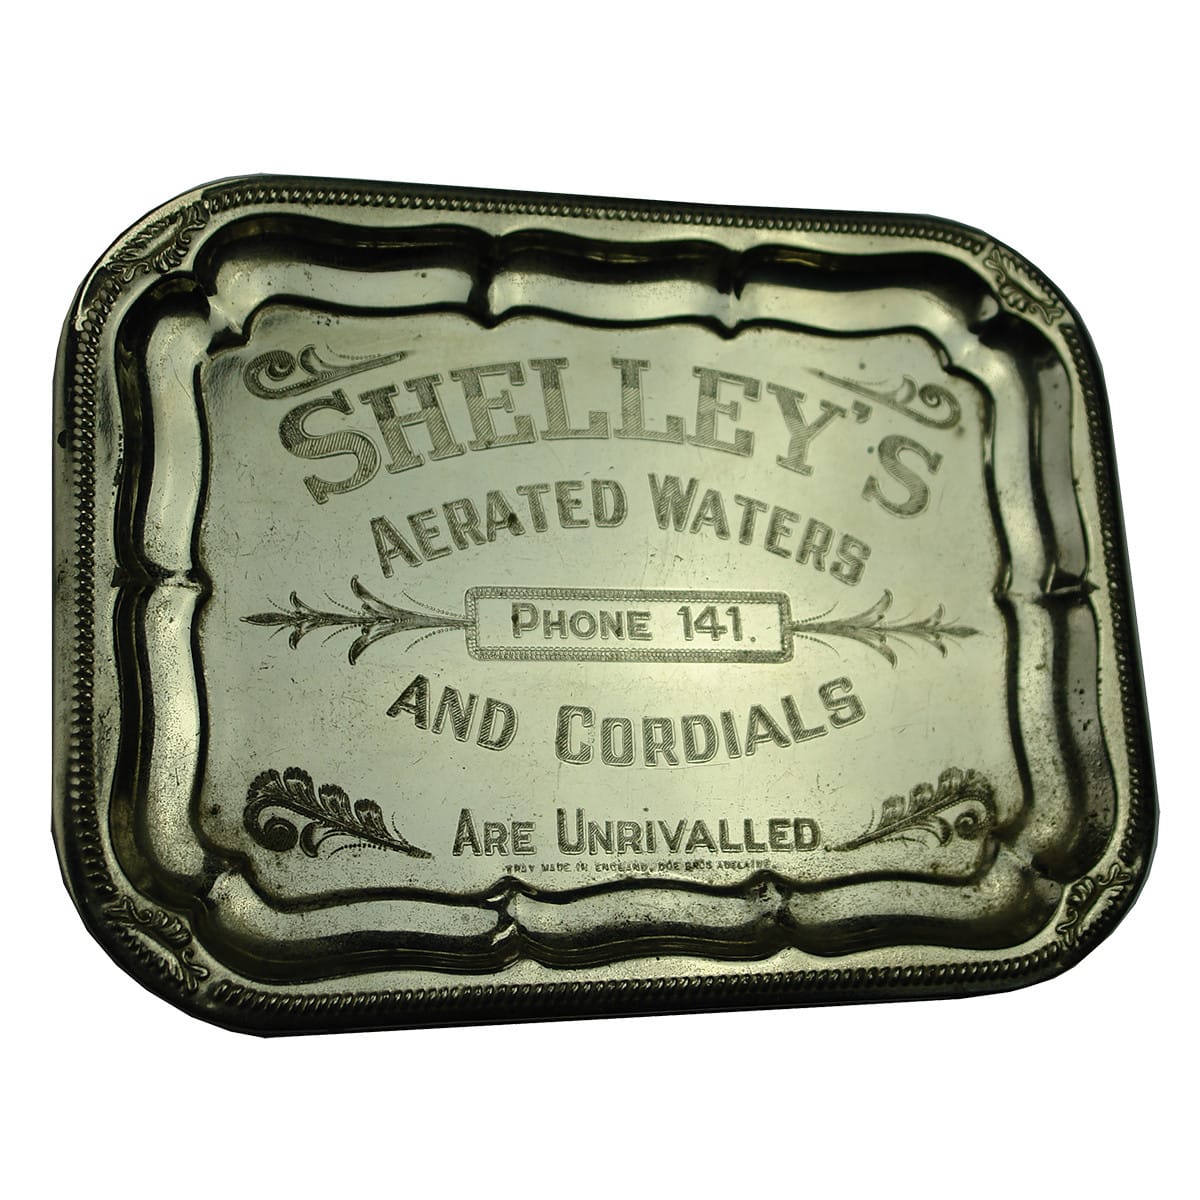 Serving Tray. Shelley's Aerated Waters and Cordials are Unrivalled. Phone 141. (Broken Hill, New South Wales)